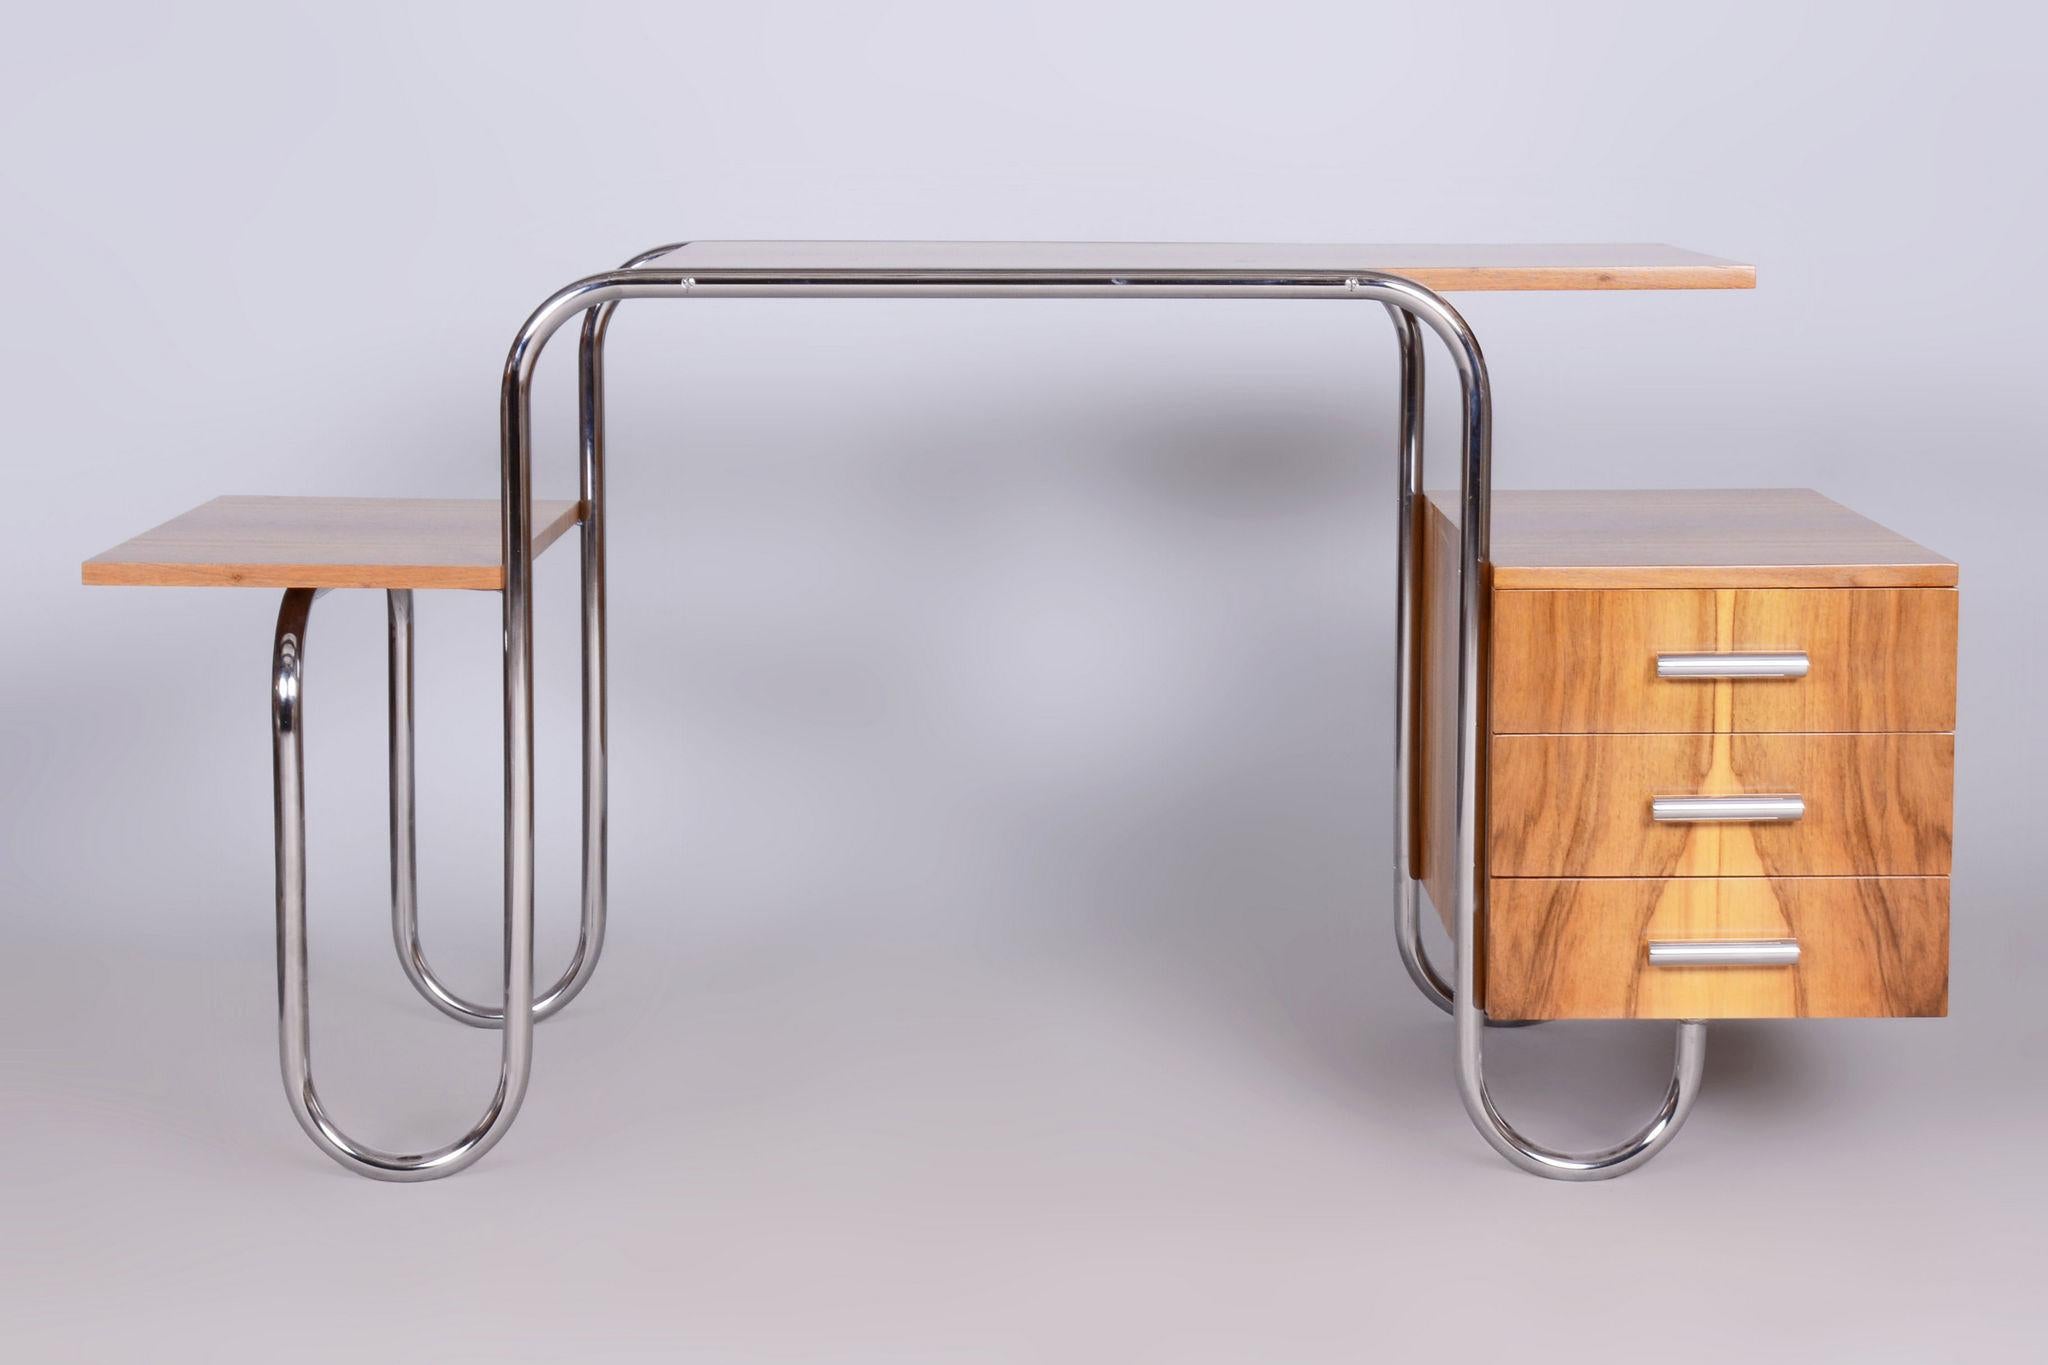 Restored Bauhaus Writing Desk

Catalog model: PS 8
Material: Walnut, Chrome-plated Steel
Source: Czechia (Czechoslovakia)
Period: 1930-1939

This desk was designed by French modernist architect André Lurcat.

The chrome parts have been cleaned and